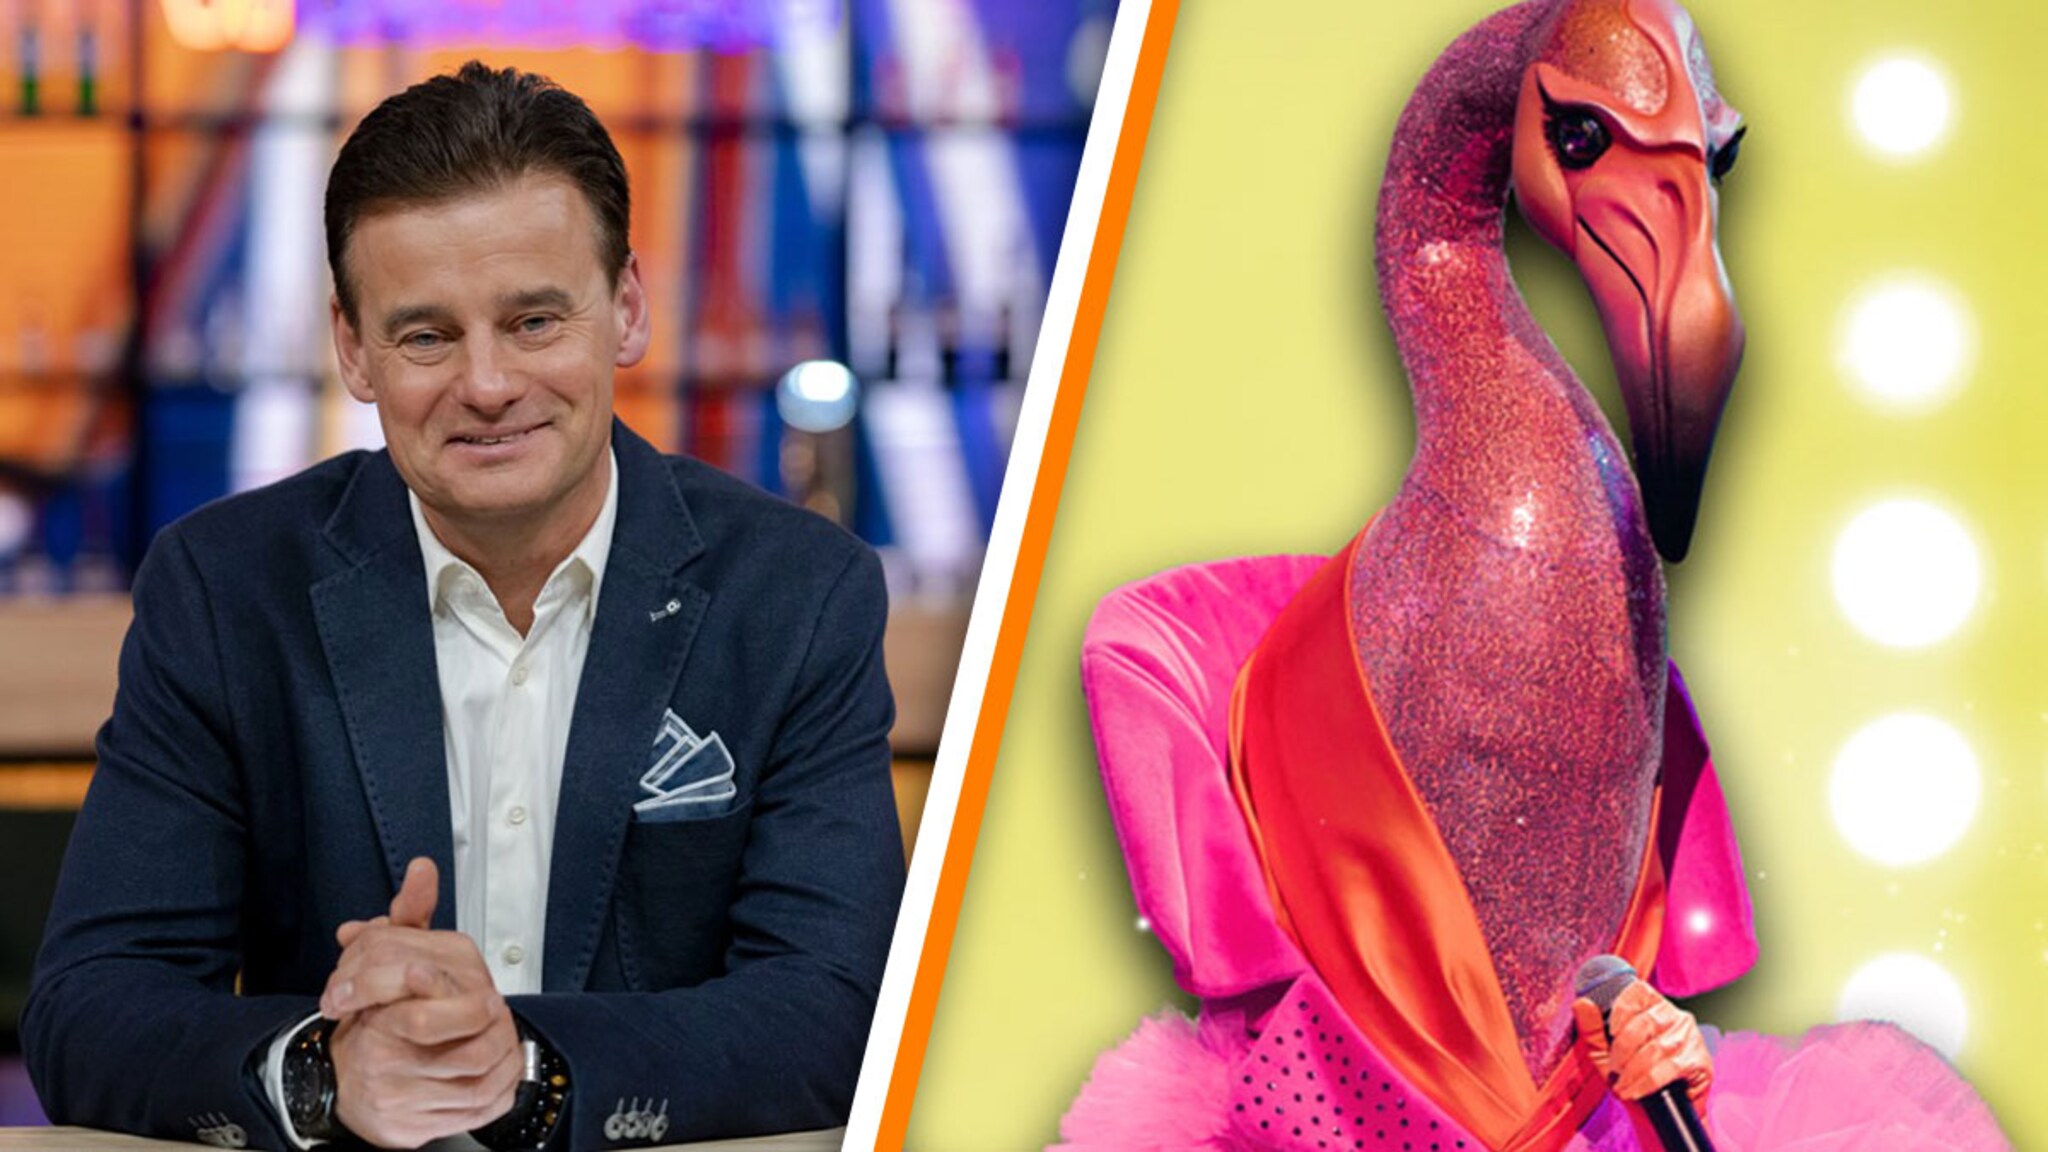 Will Wilfred Jenny consciously reveal the identity of the Flamingo from the Masked Singer?